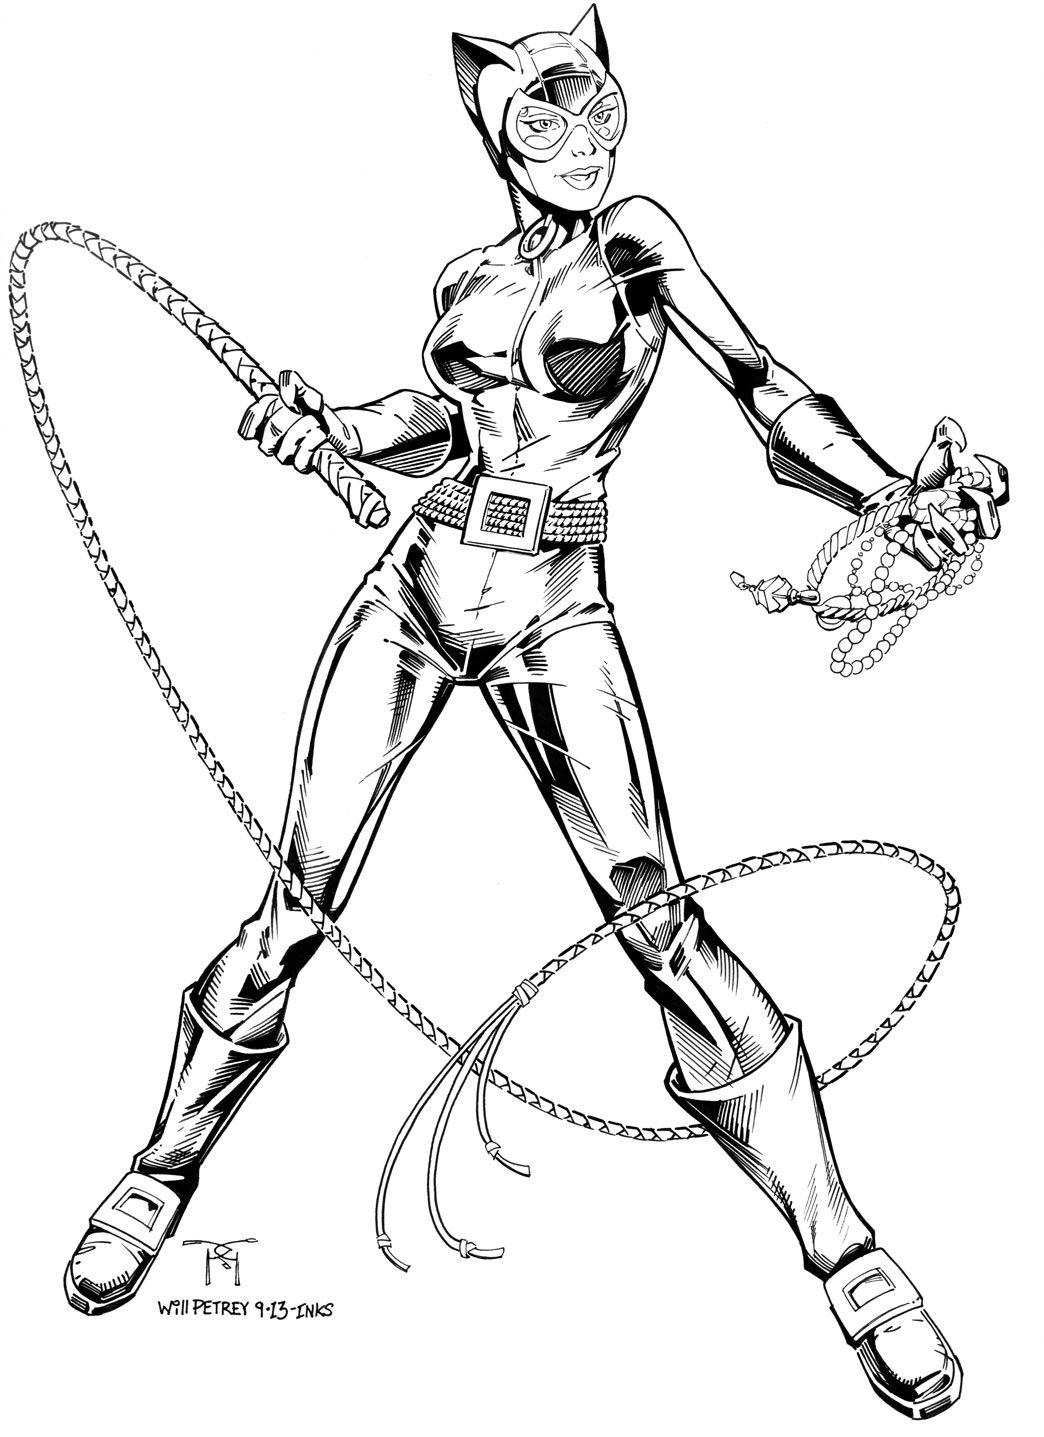 Catwoman by Will Petrey | Batman coloring pages, Superhero ...